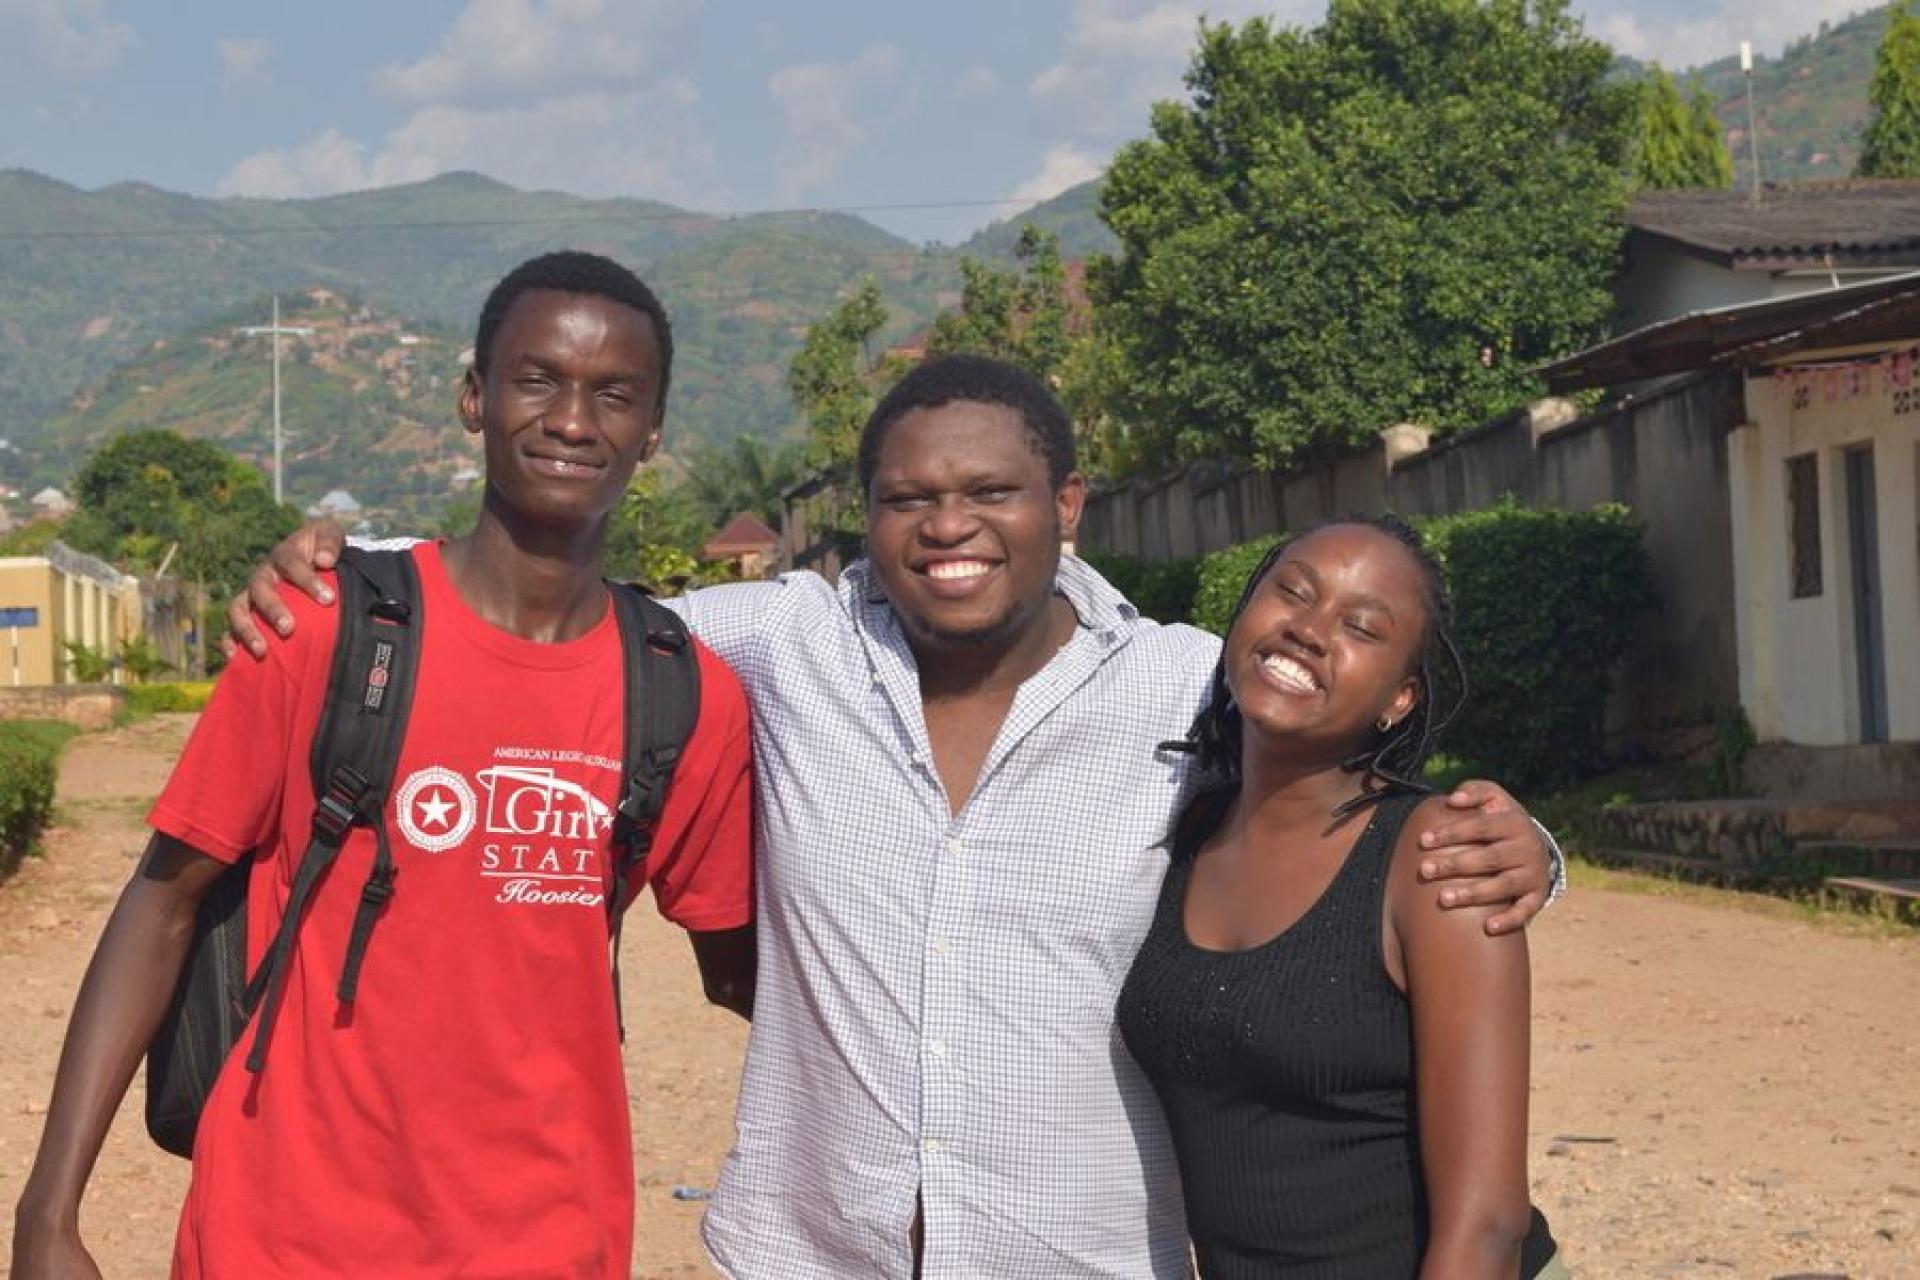 Gates Cambridge Scholar Etienne Mashuli poses with two of his students.